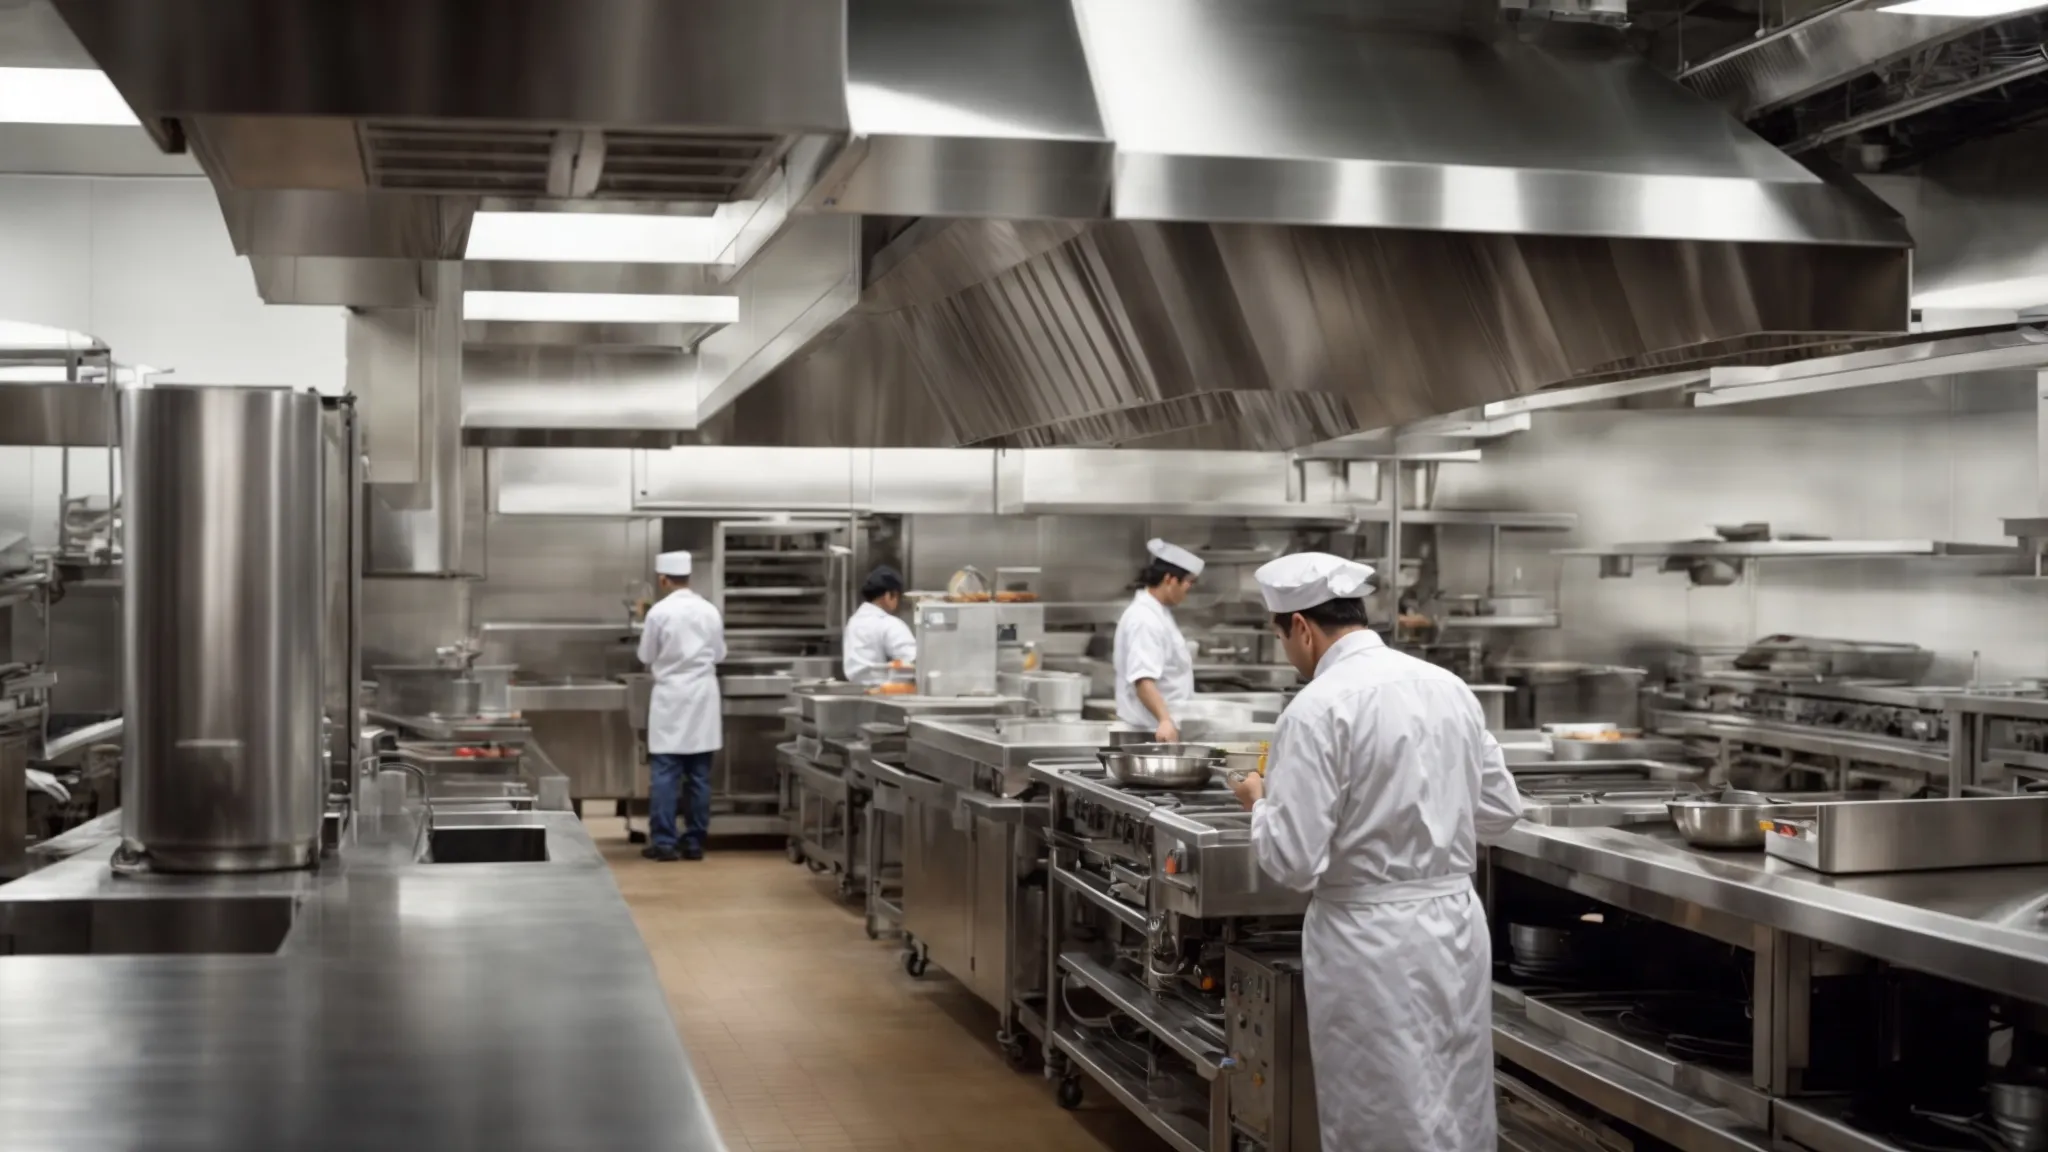 a commercial kitchen bustling with activity as a newly installed, sleek ventilation system hums quietly above.